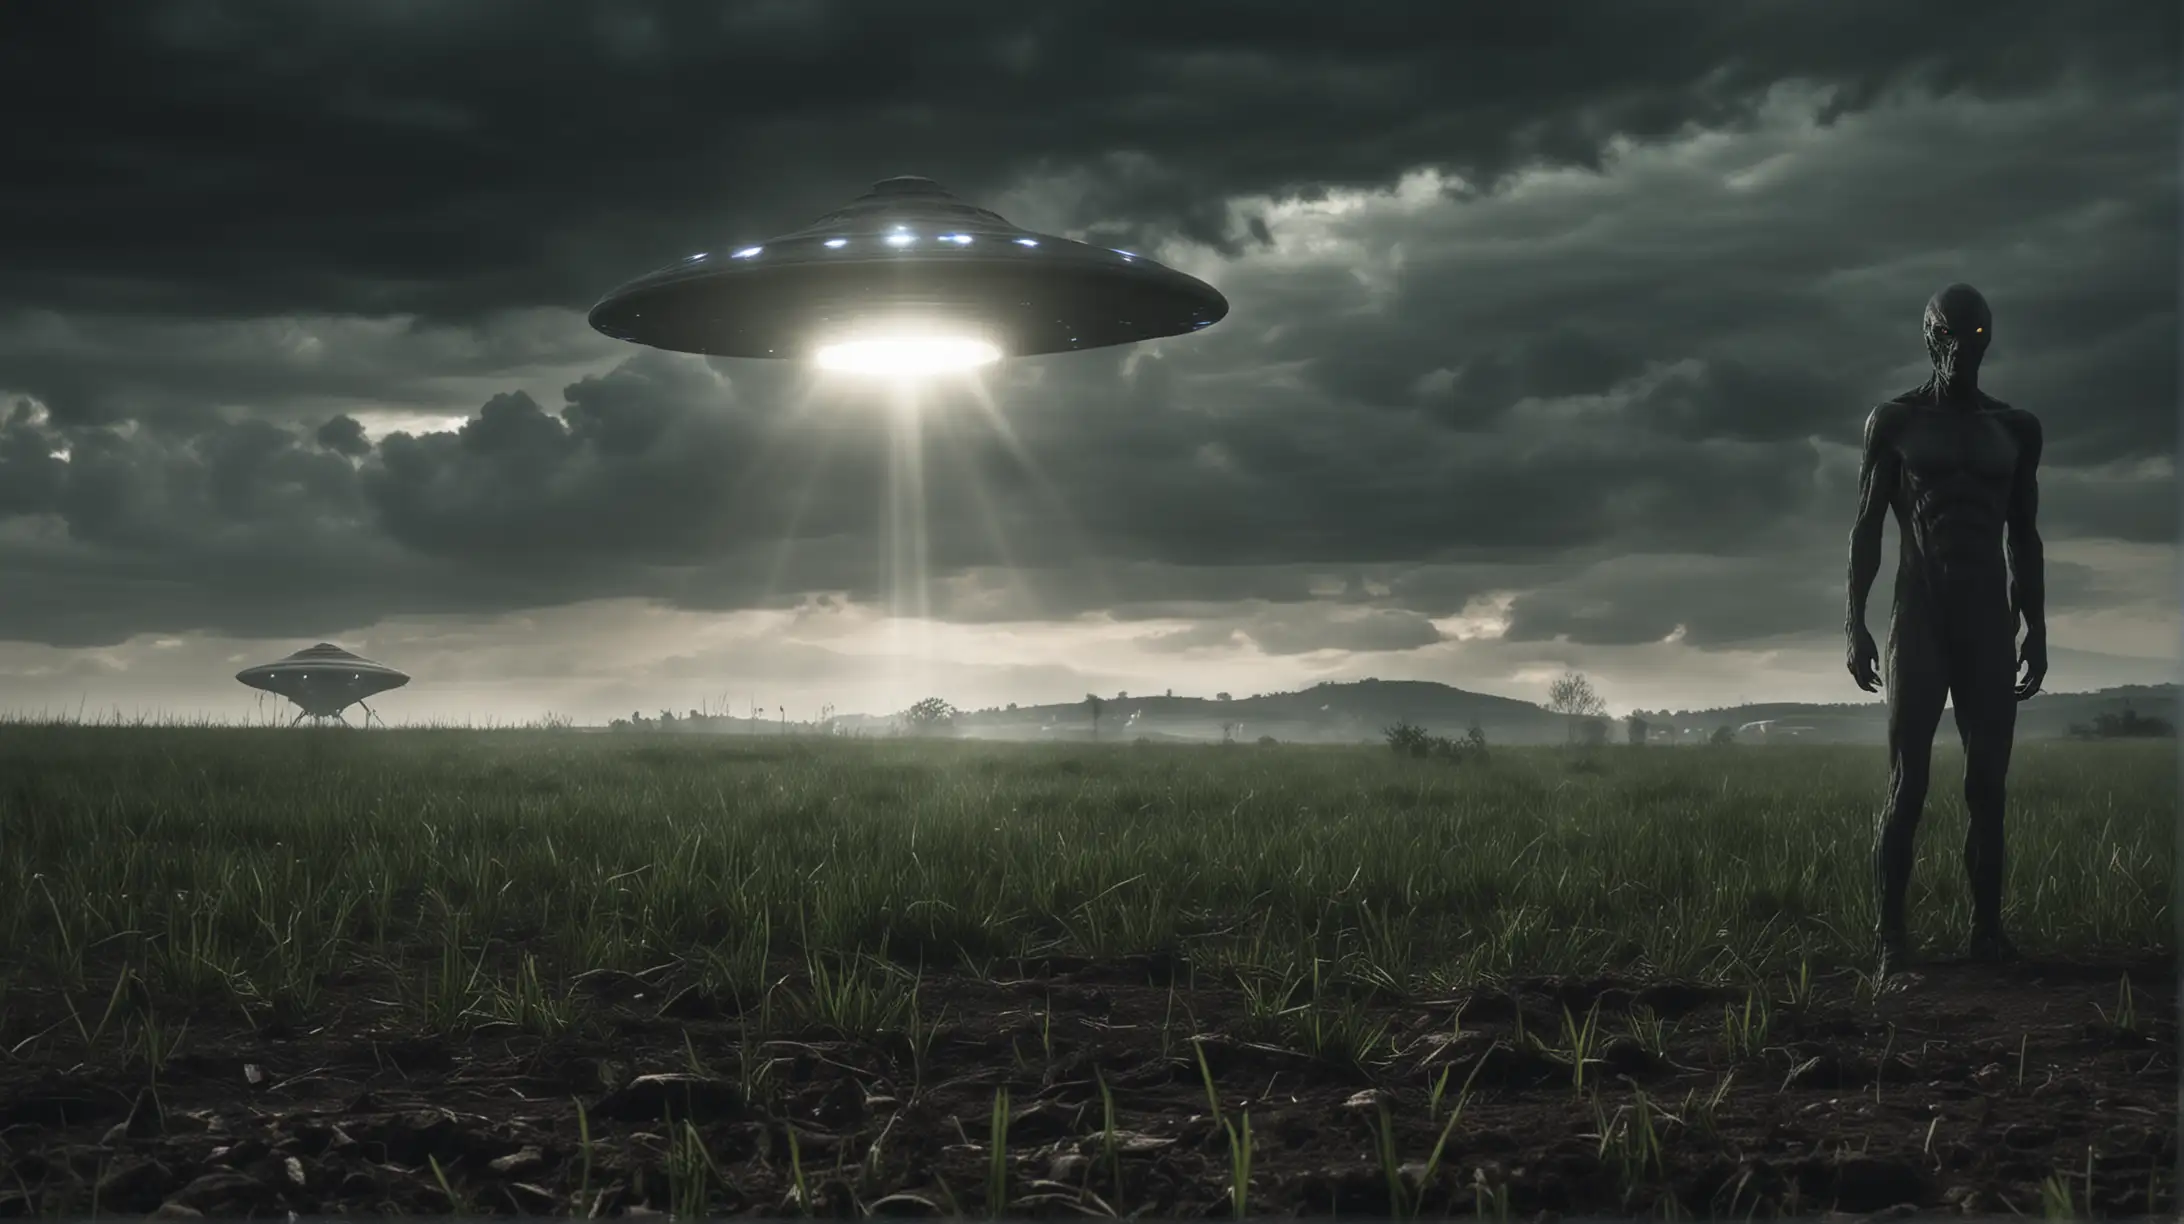 Sinister Alien Abduction Scene Otherworldly Encounter in a Desolate Field